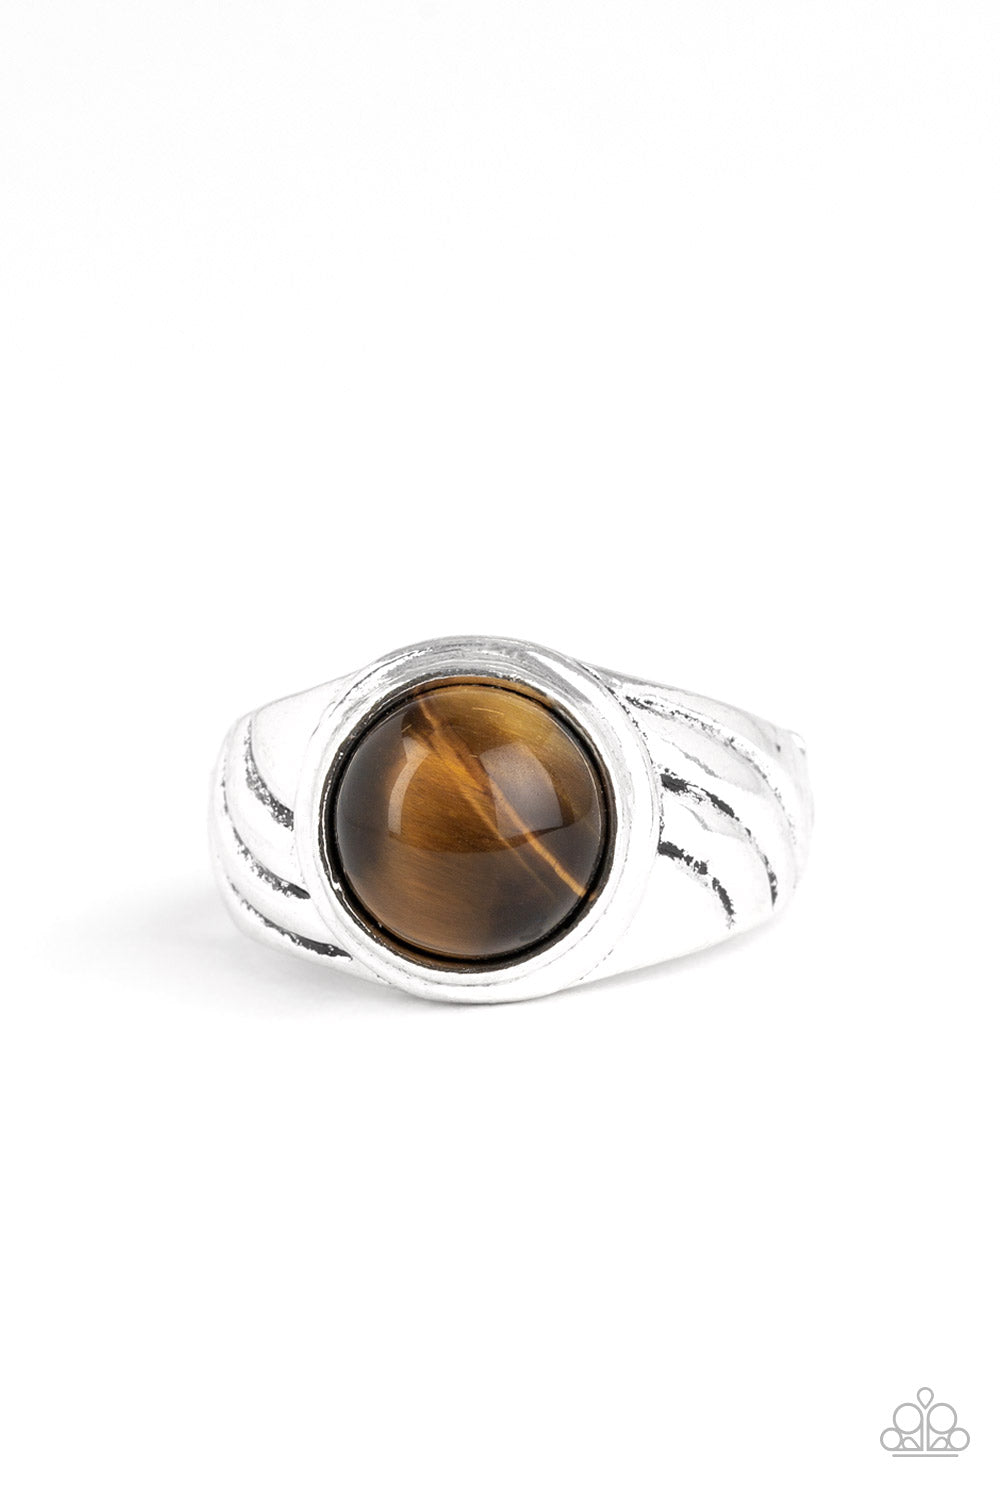 Play It Cool Brown Urban Ring - Paparazzi Accessories  A round tiger's eye stone is pressed into the center of an antiqued silver band for a rustic look. Features a stretchy band for a flexible fit.  Sold as one individual ring.